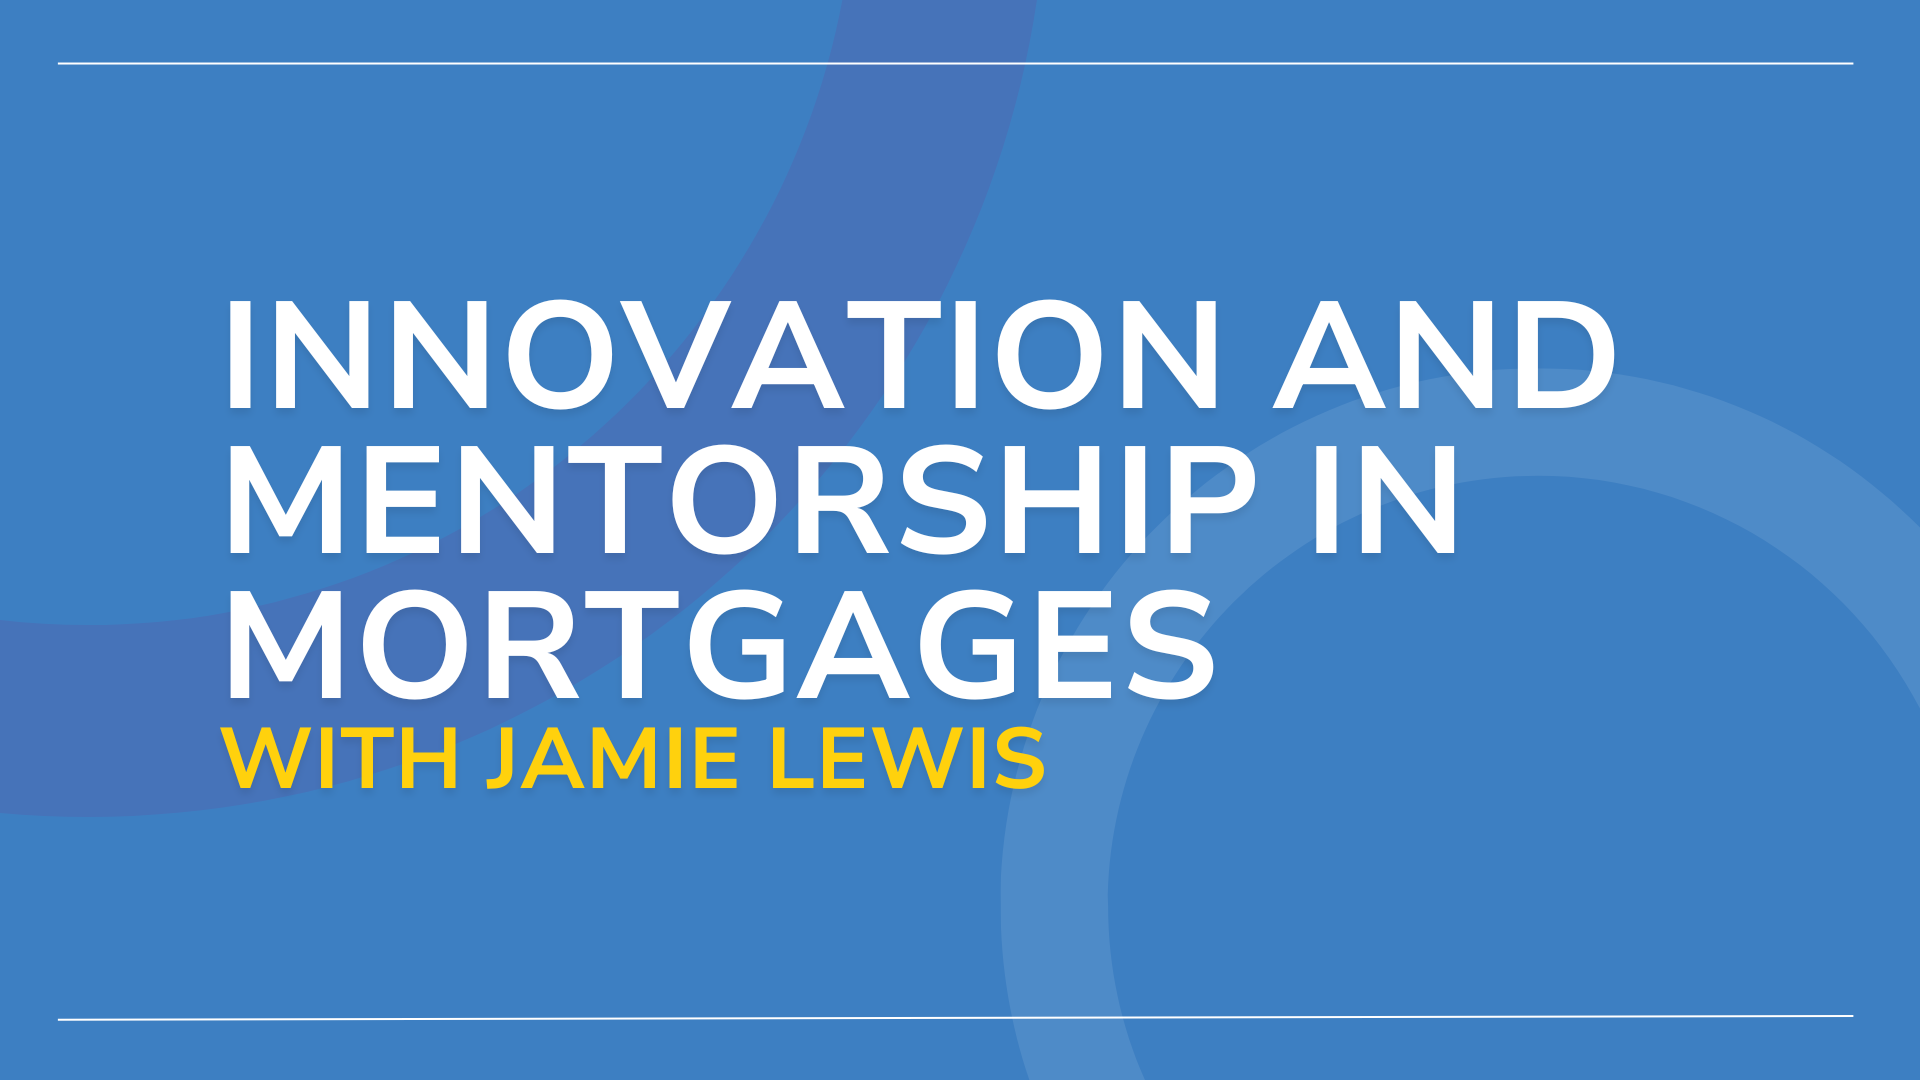 Innovation and Mentorship in Mortgages with Jamie Lewis